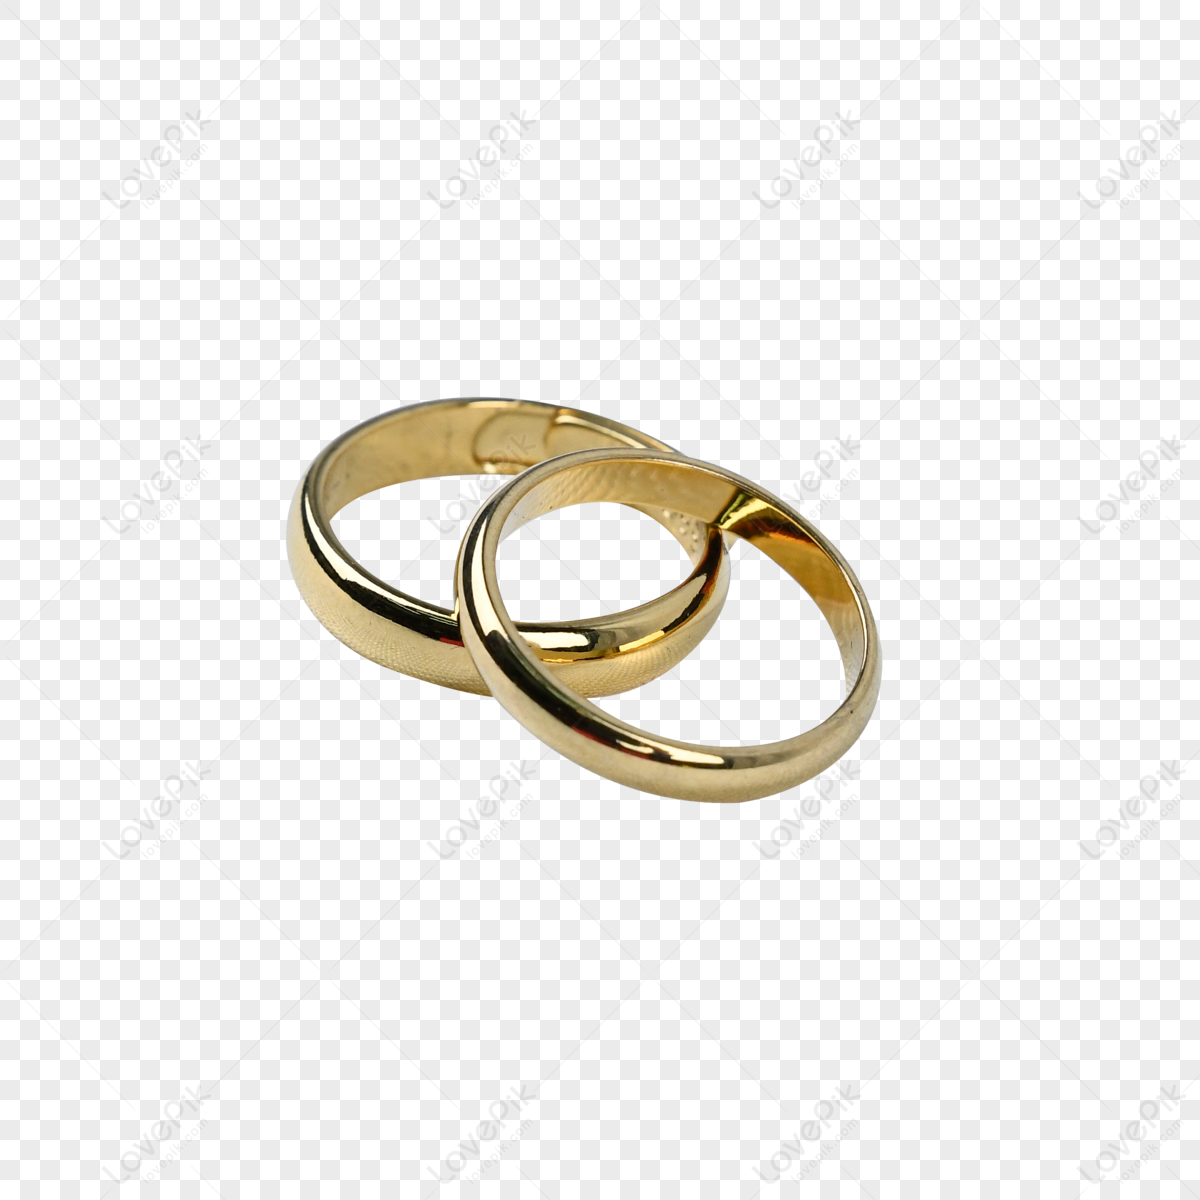 Ring Ceremony png download - 886*904 - Free Transparent Ruby png Download.  - CleanPNG / KissPNG